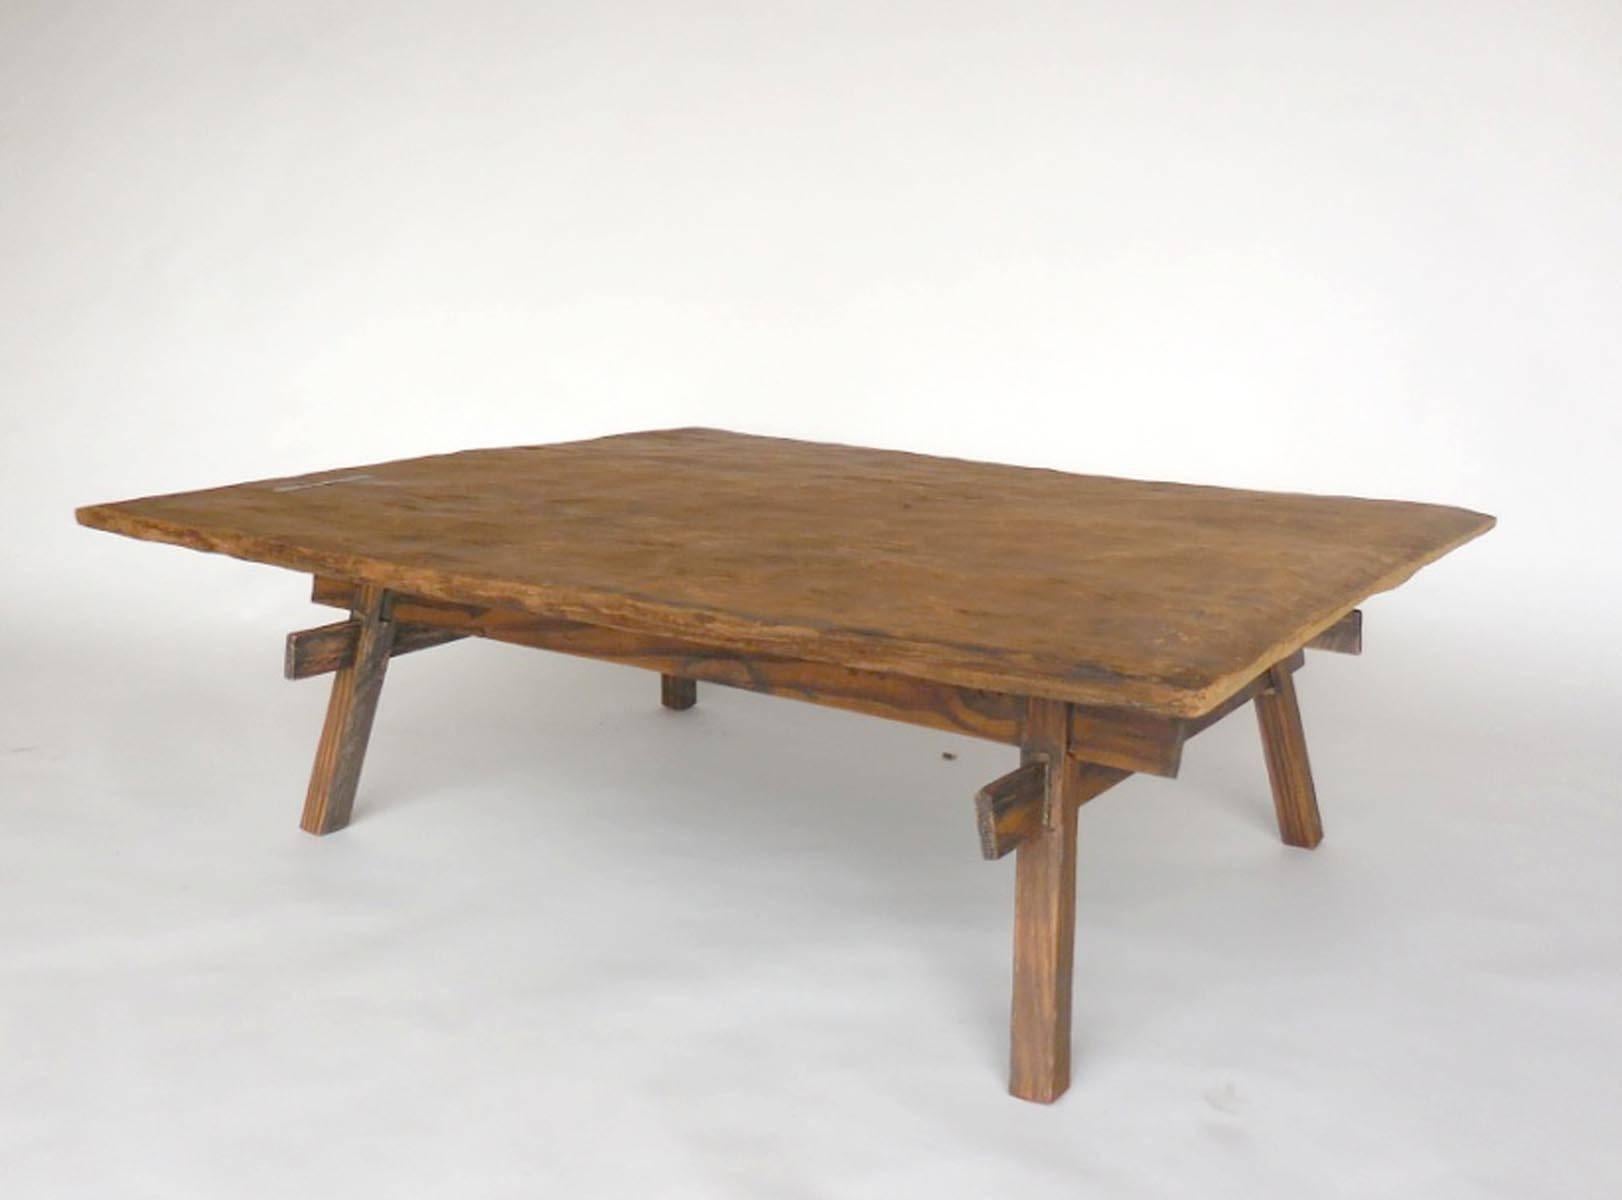 Guatemalan Rustic Coffee Table with Straight Legs